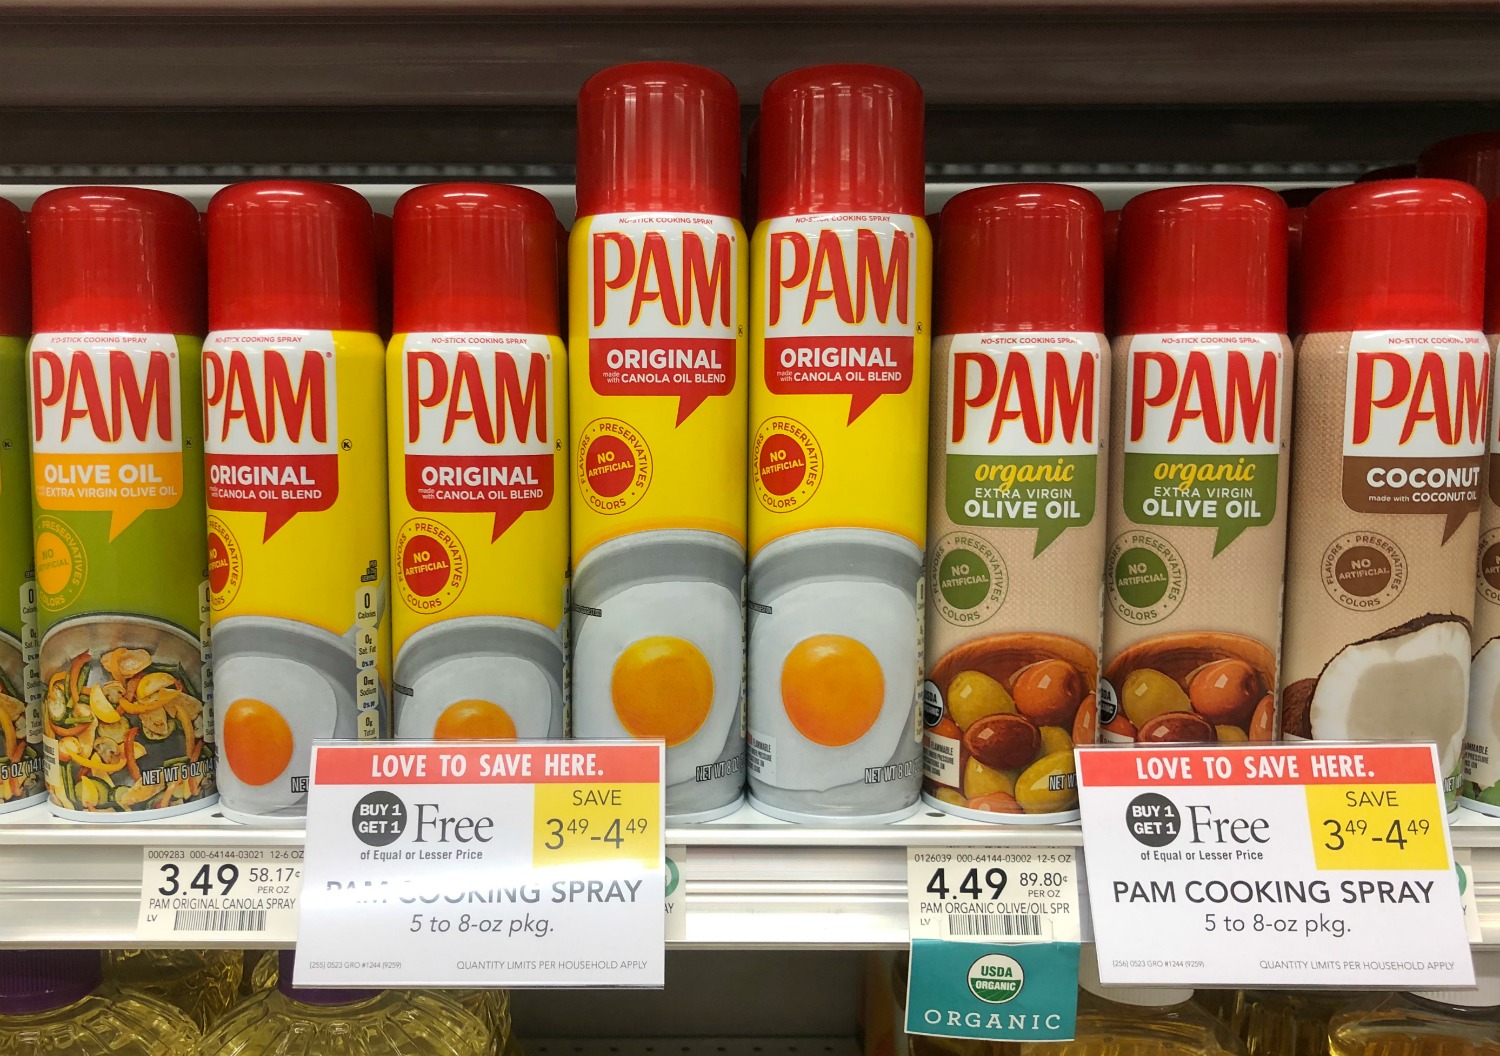 PAM Cooking Spray As Low 75&162 At Publix.